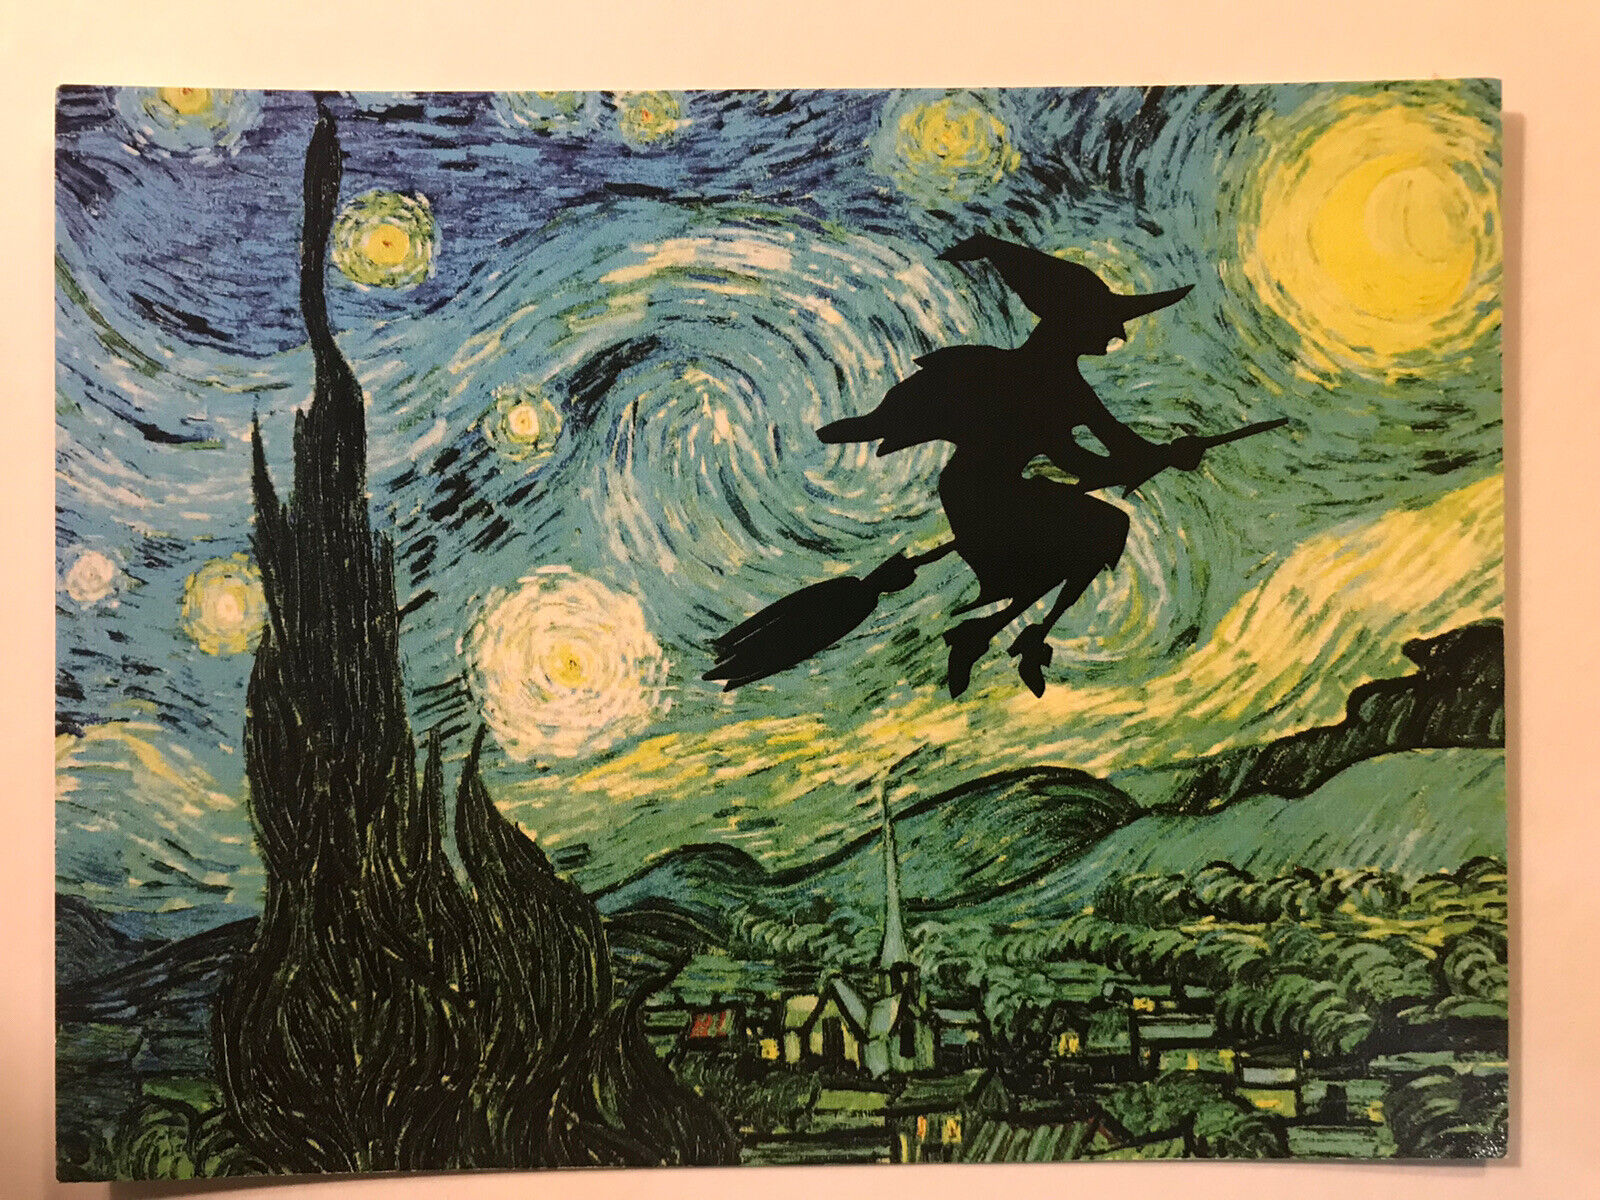 POSTCARD WITCH FLYING ON A HALLOWEEN “STARRY, STARRY NIGHT” (SCARY SCARY NIGHT)